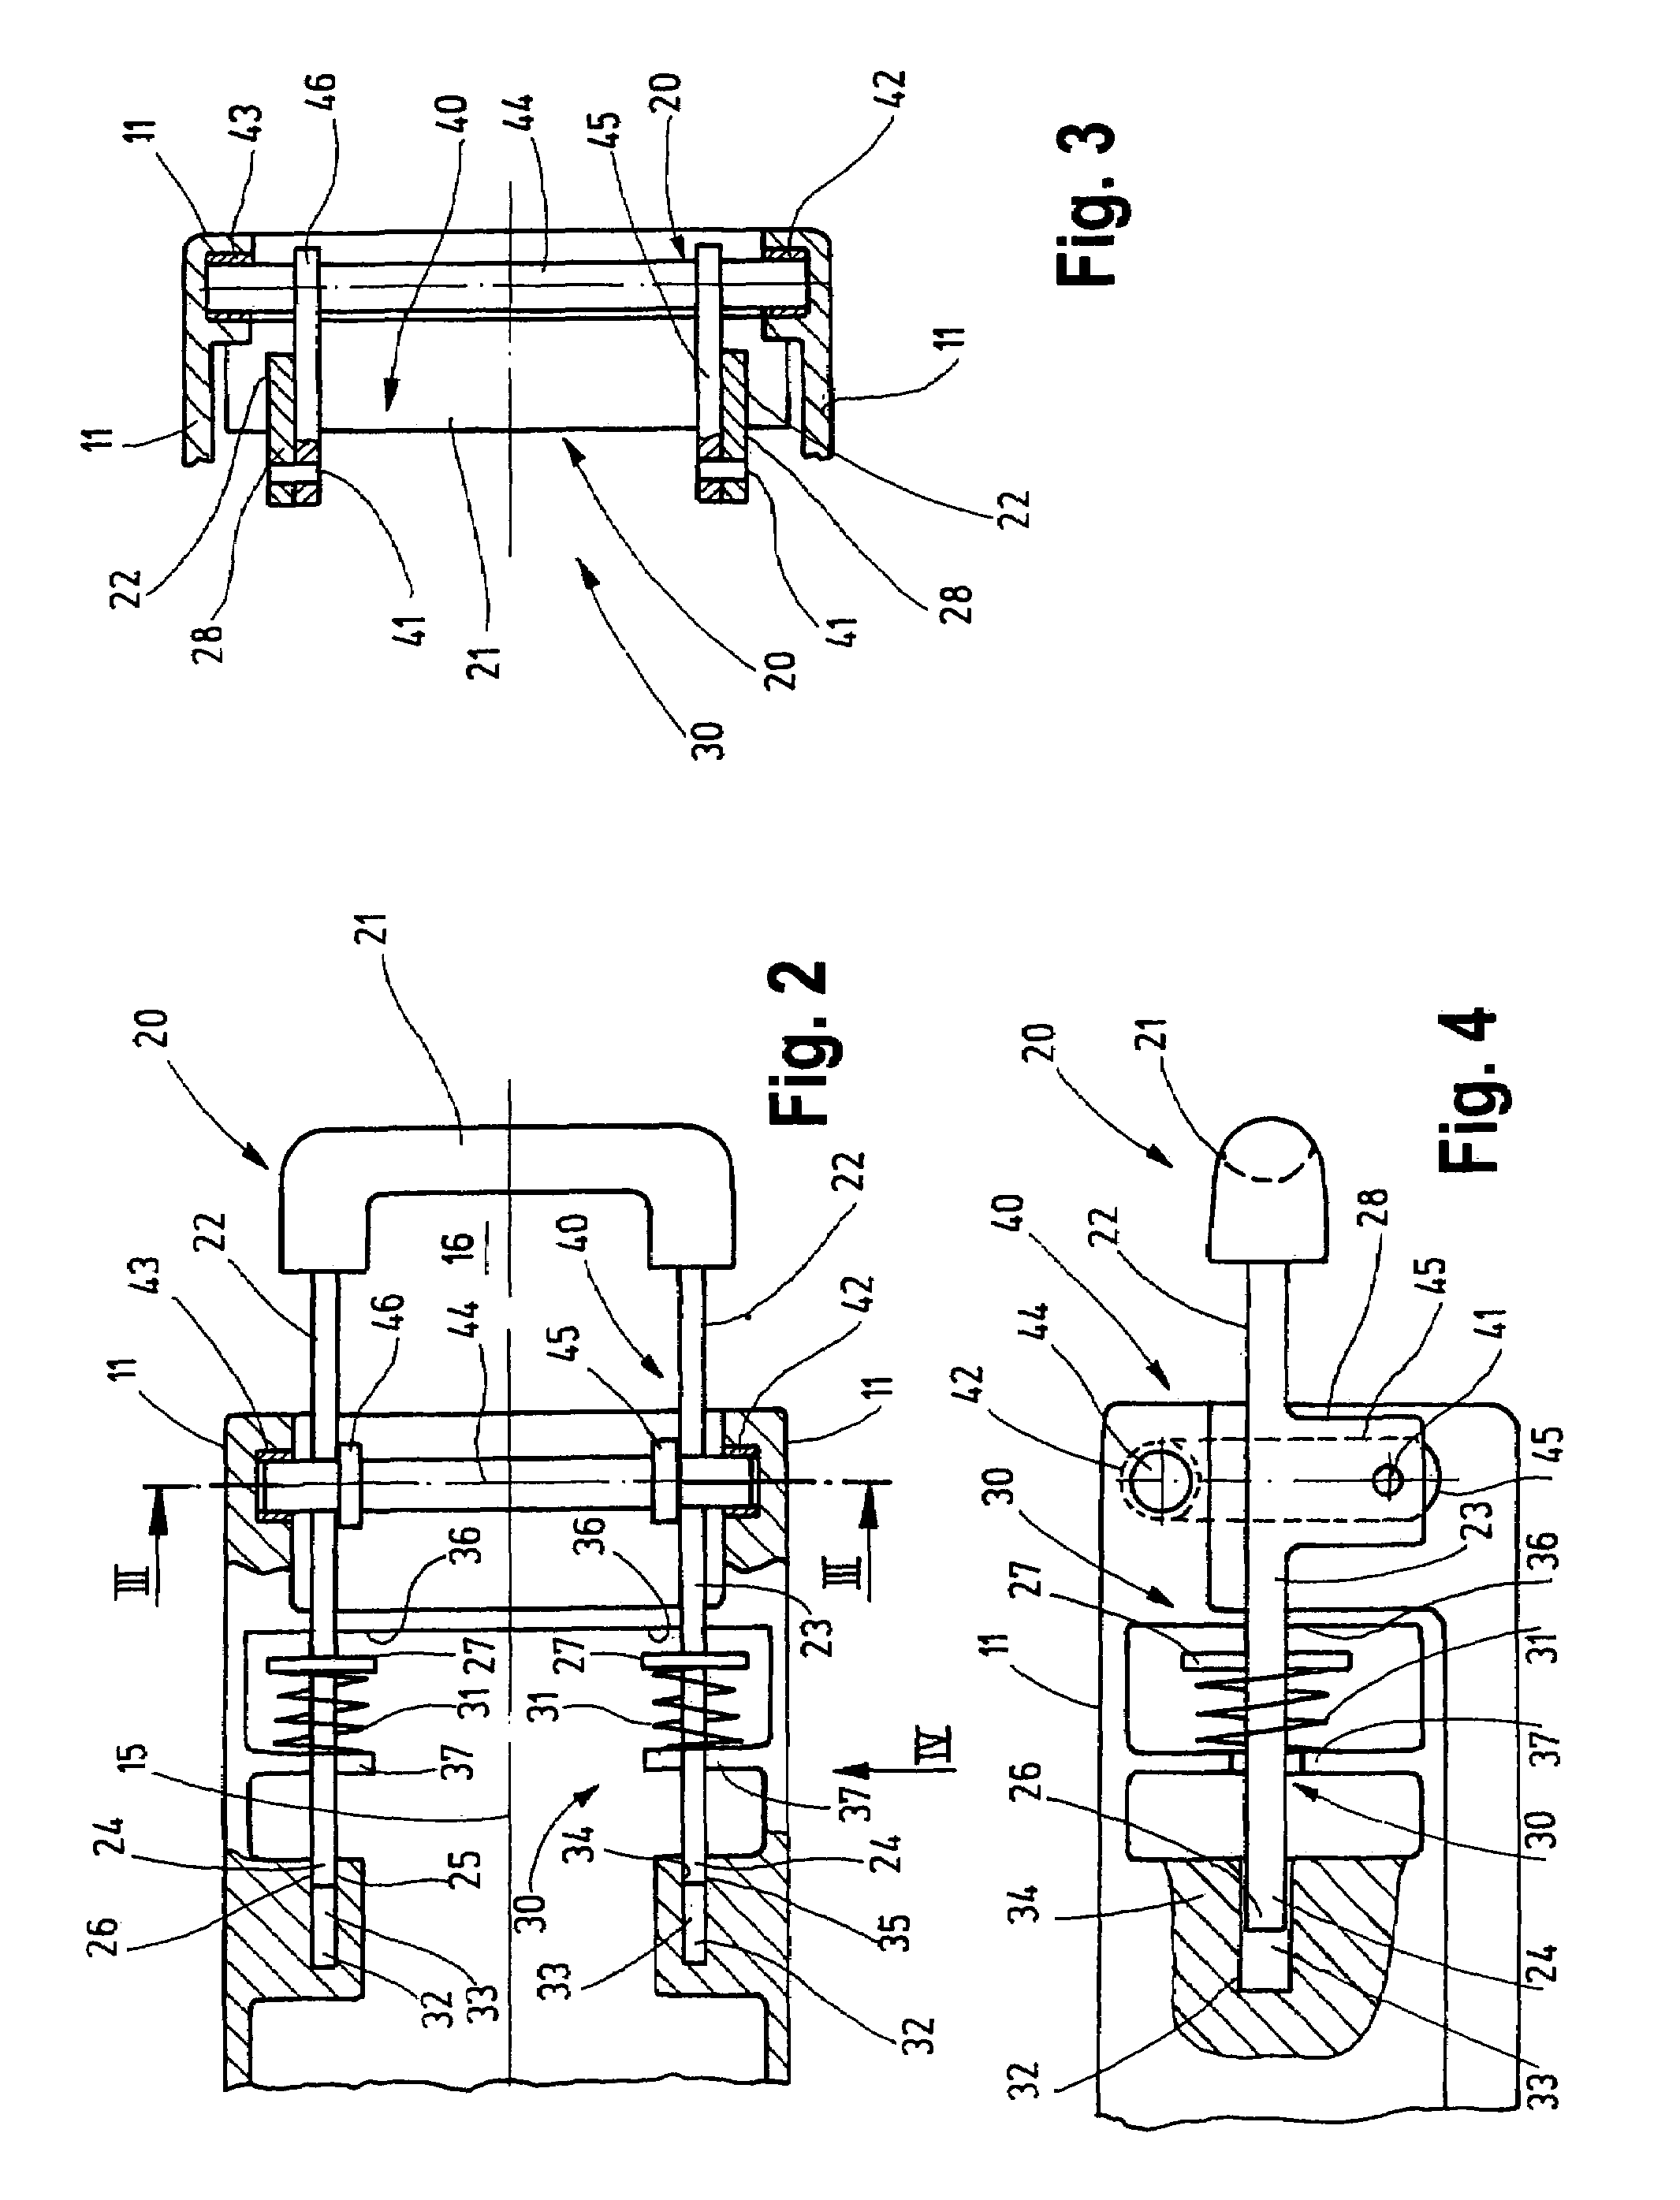 Power tool with a rotating and/or hammering drive mechanism